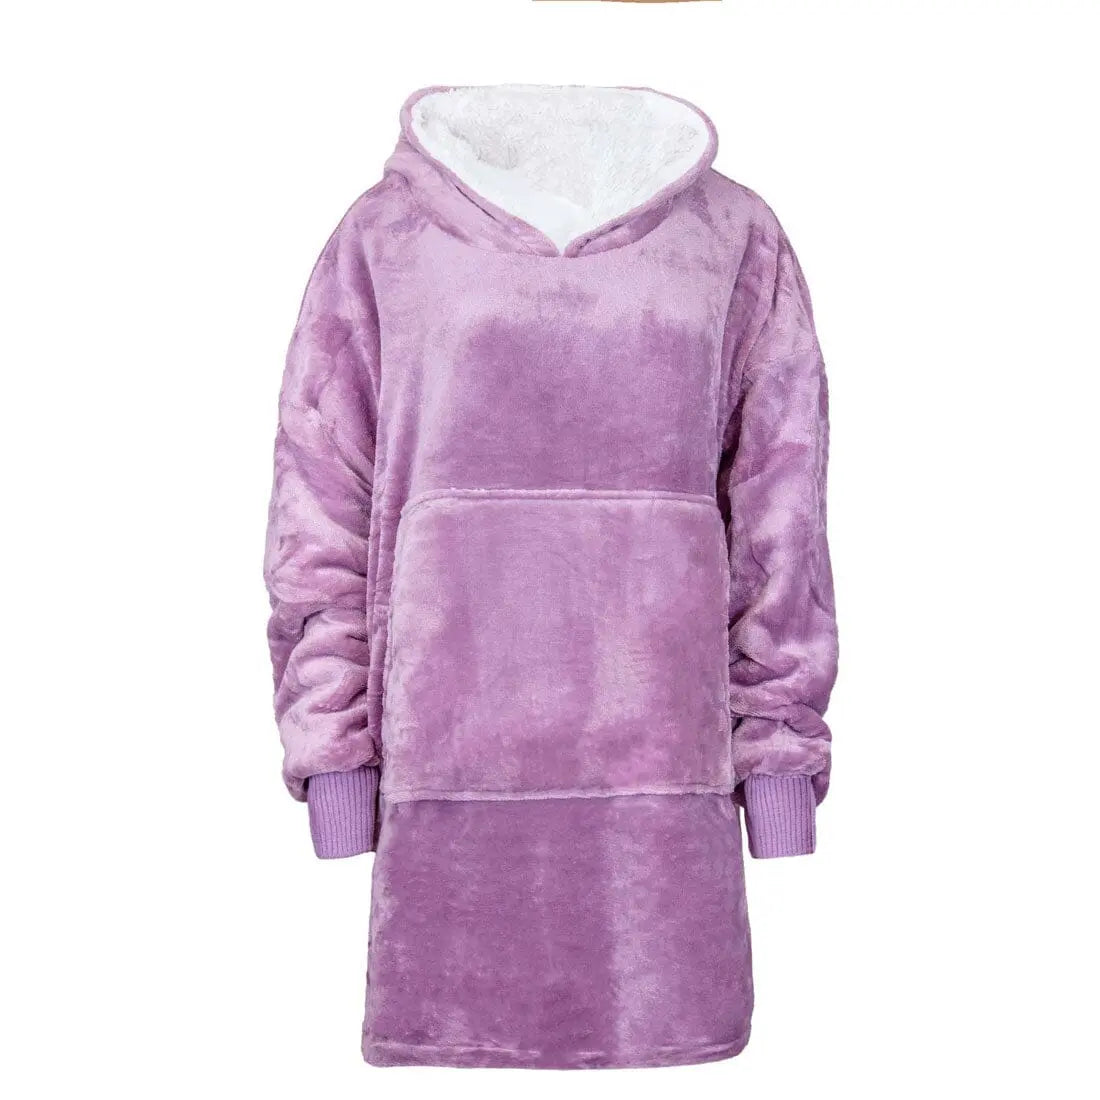 Children's Hooded Wearable Blanket Sherpa - Lavender Age 4-6 years 